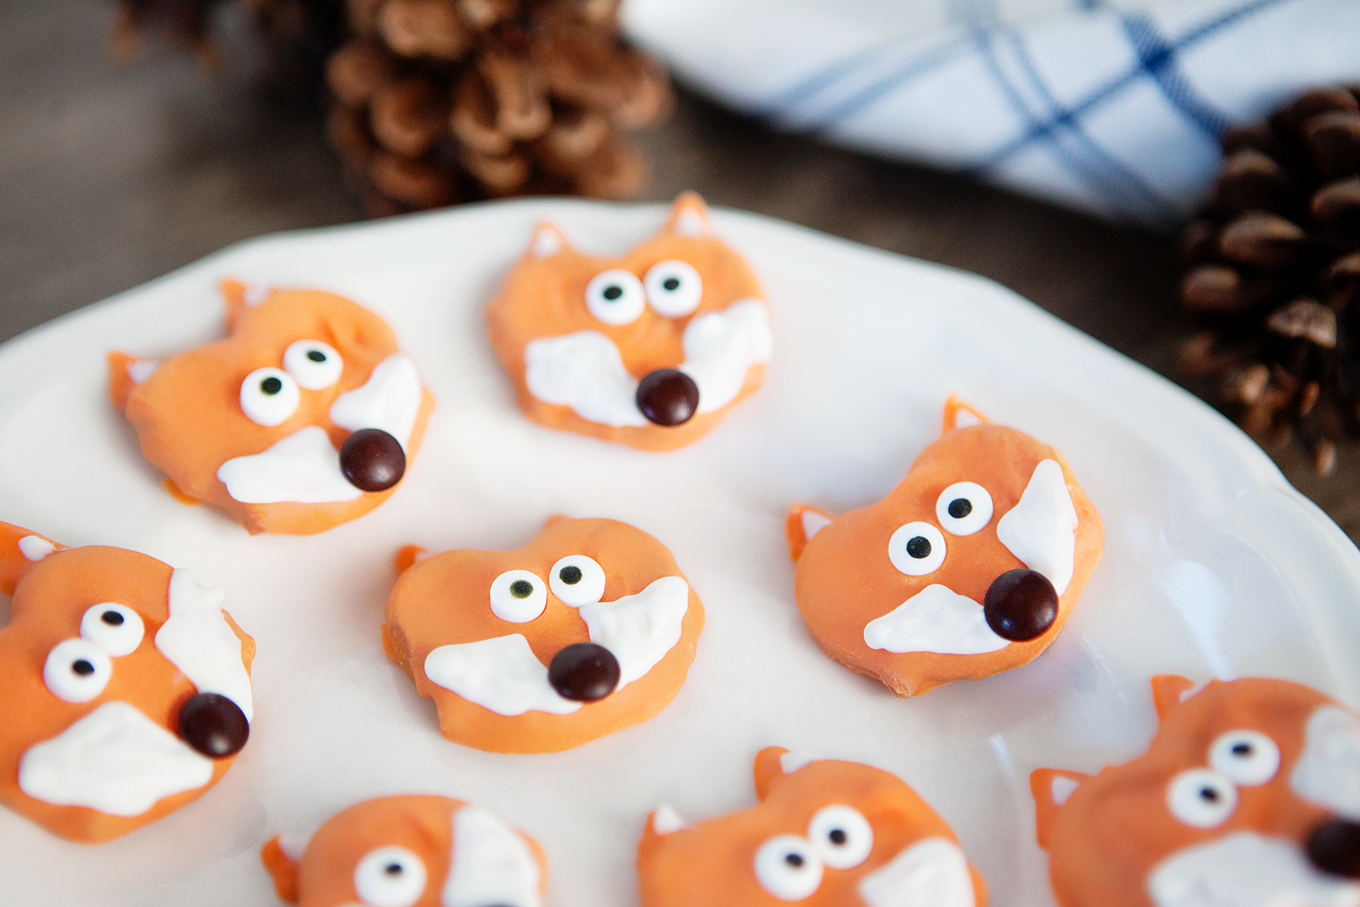 The cutest little chocolate covered fox pretzels. A delicious fall treat that can be made in just a few minutes!